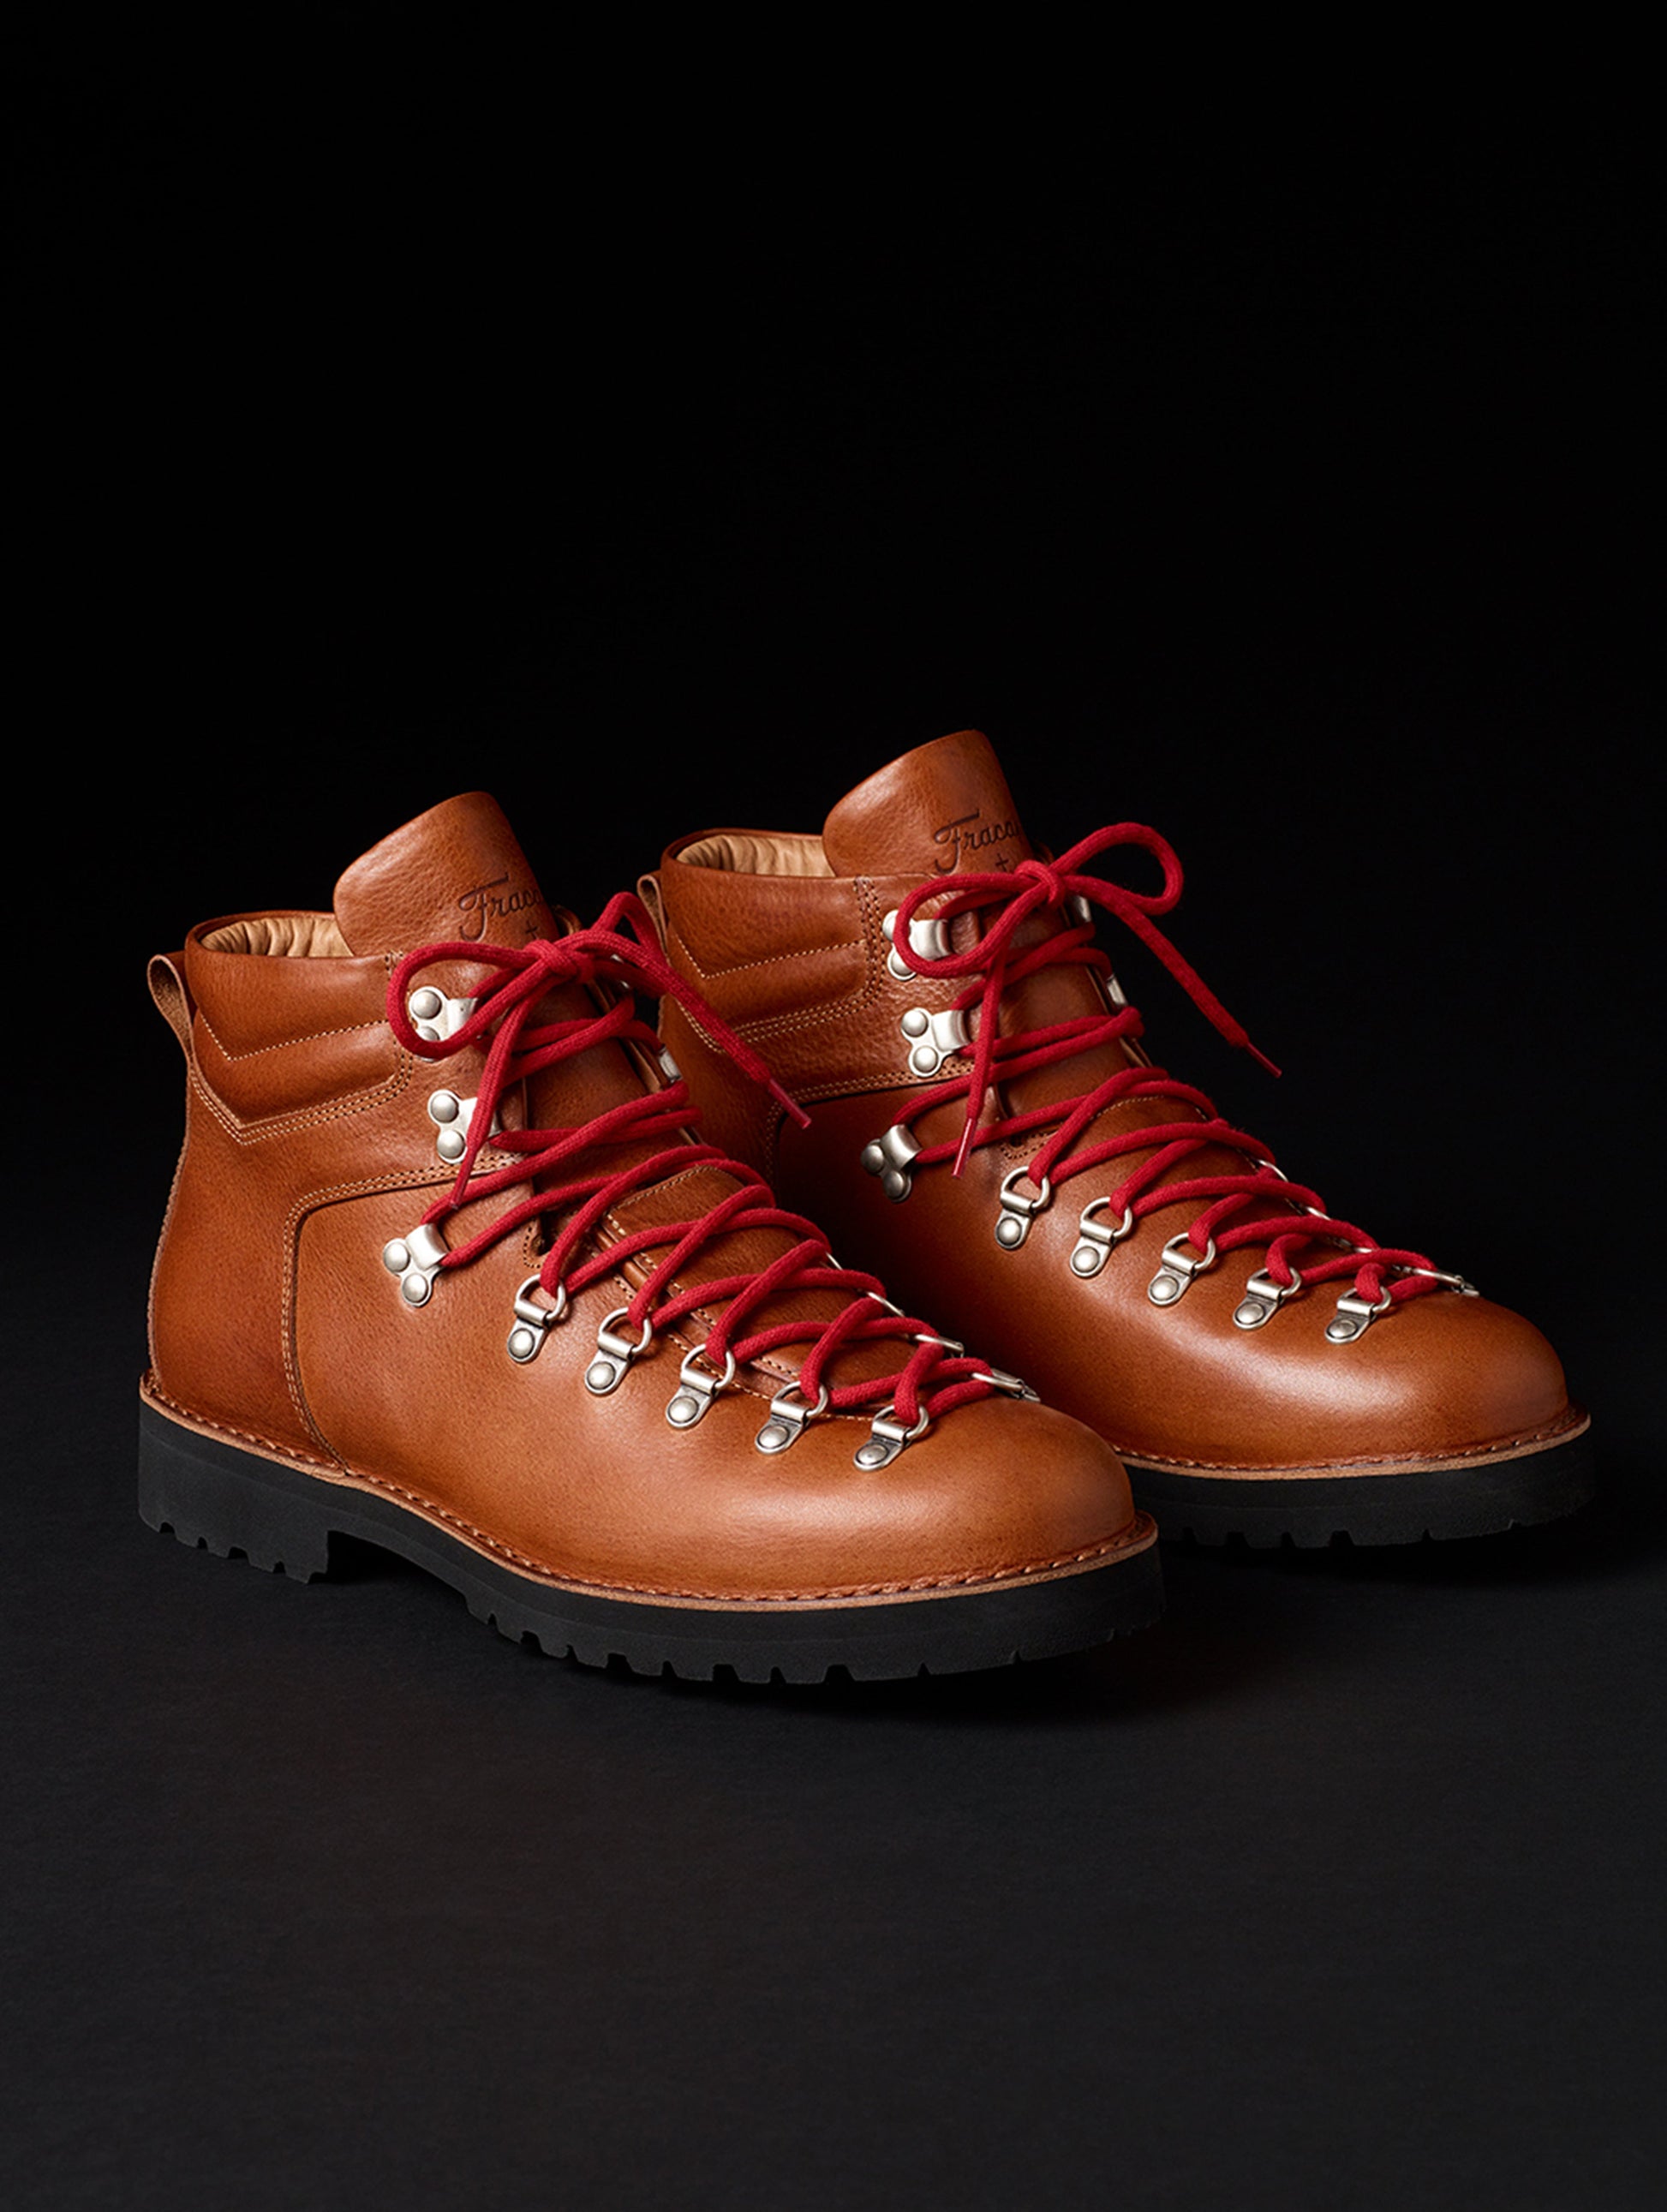 brown boot for men from Aether Apparel